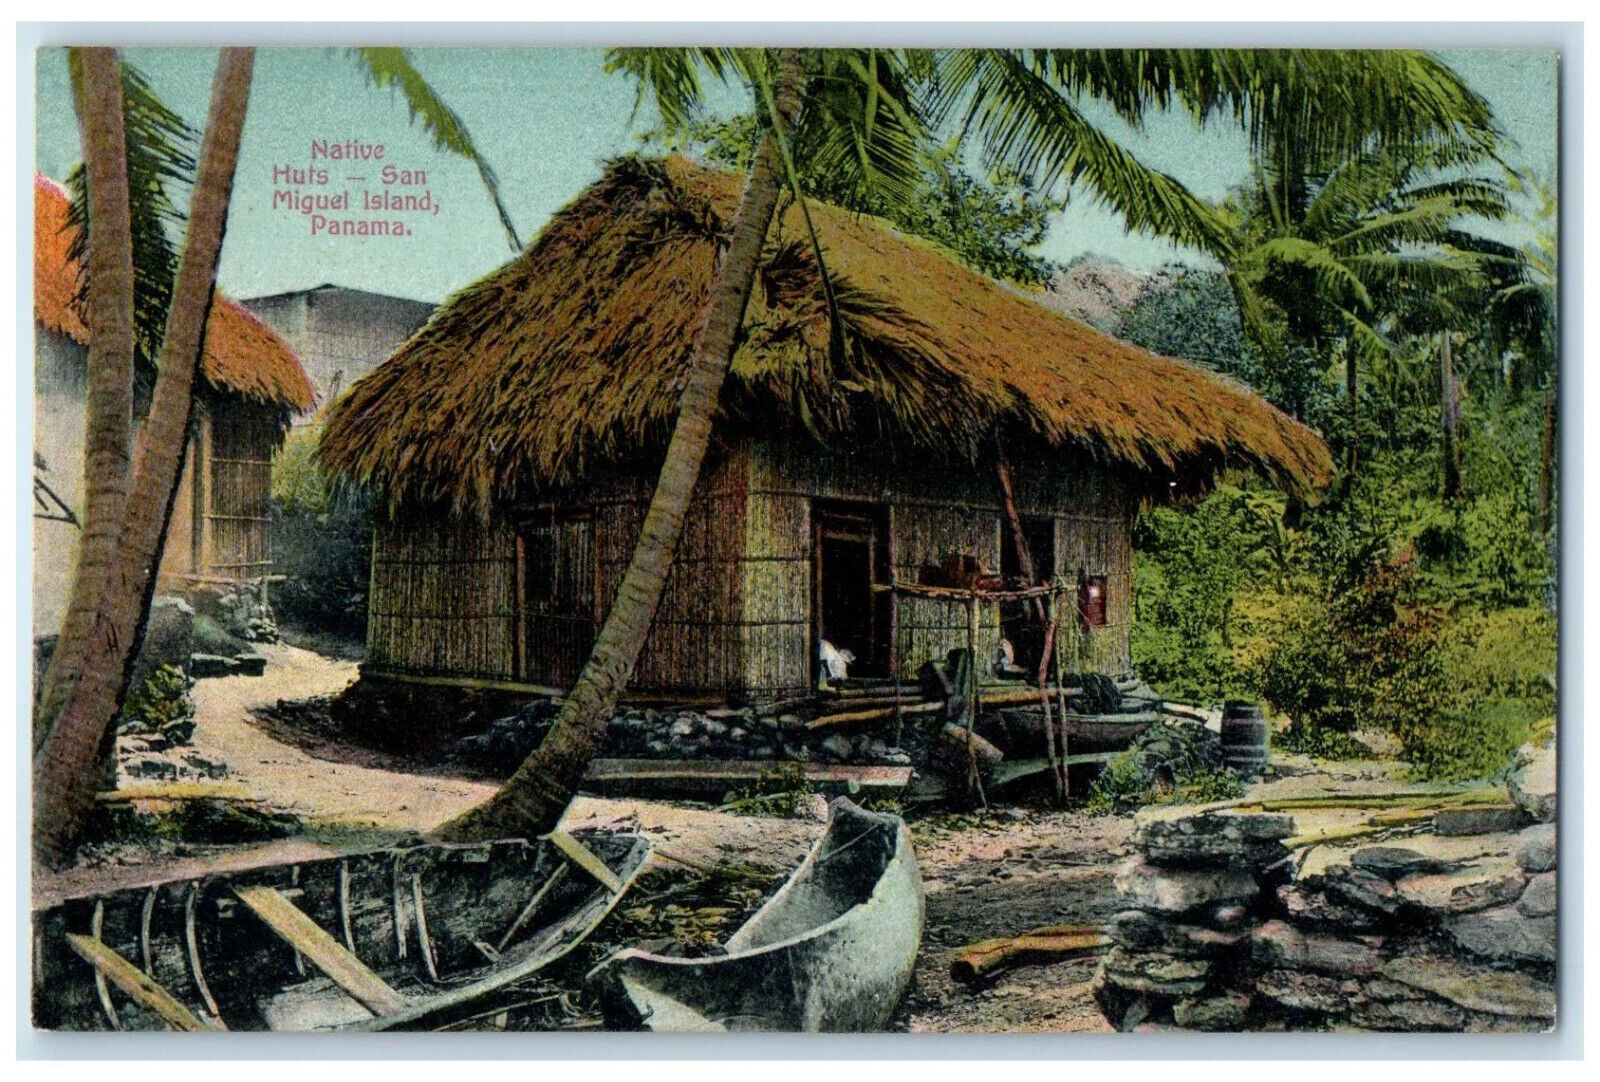 c1910 View of Native Huts San Miguel Island Panama Antique Posted Postcard